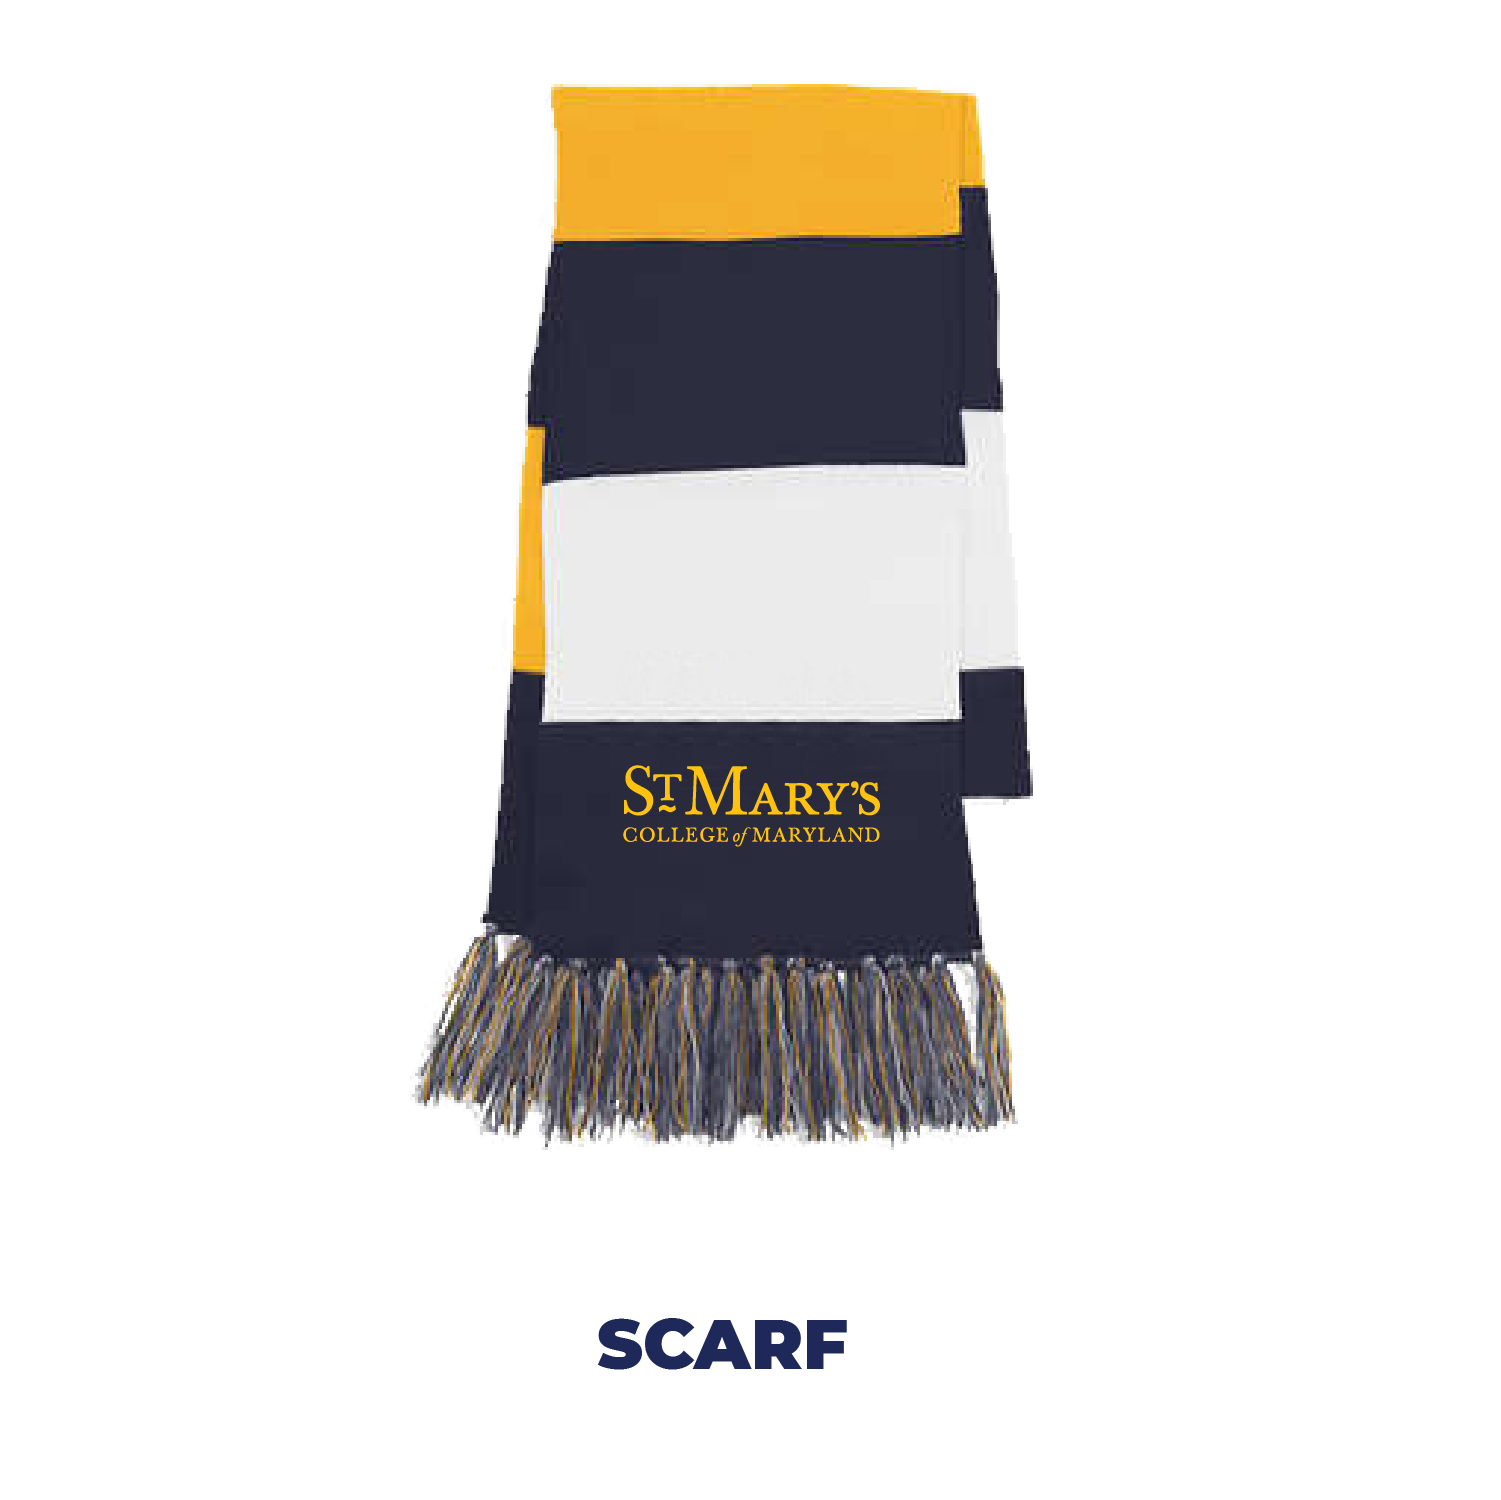 navy white and gold striped scarf with the St. Mary's College of Maryland logo on the scarf